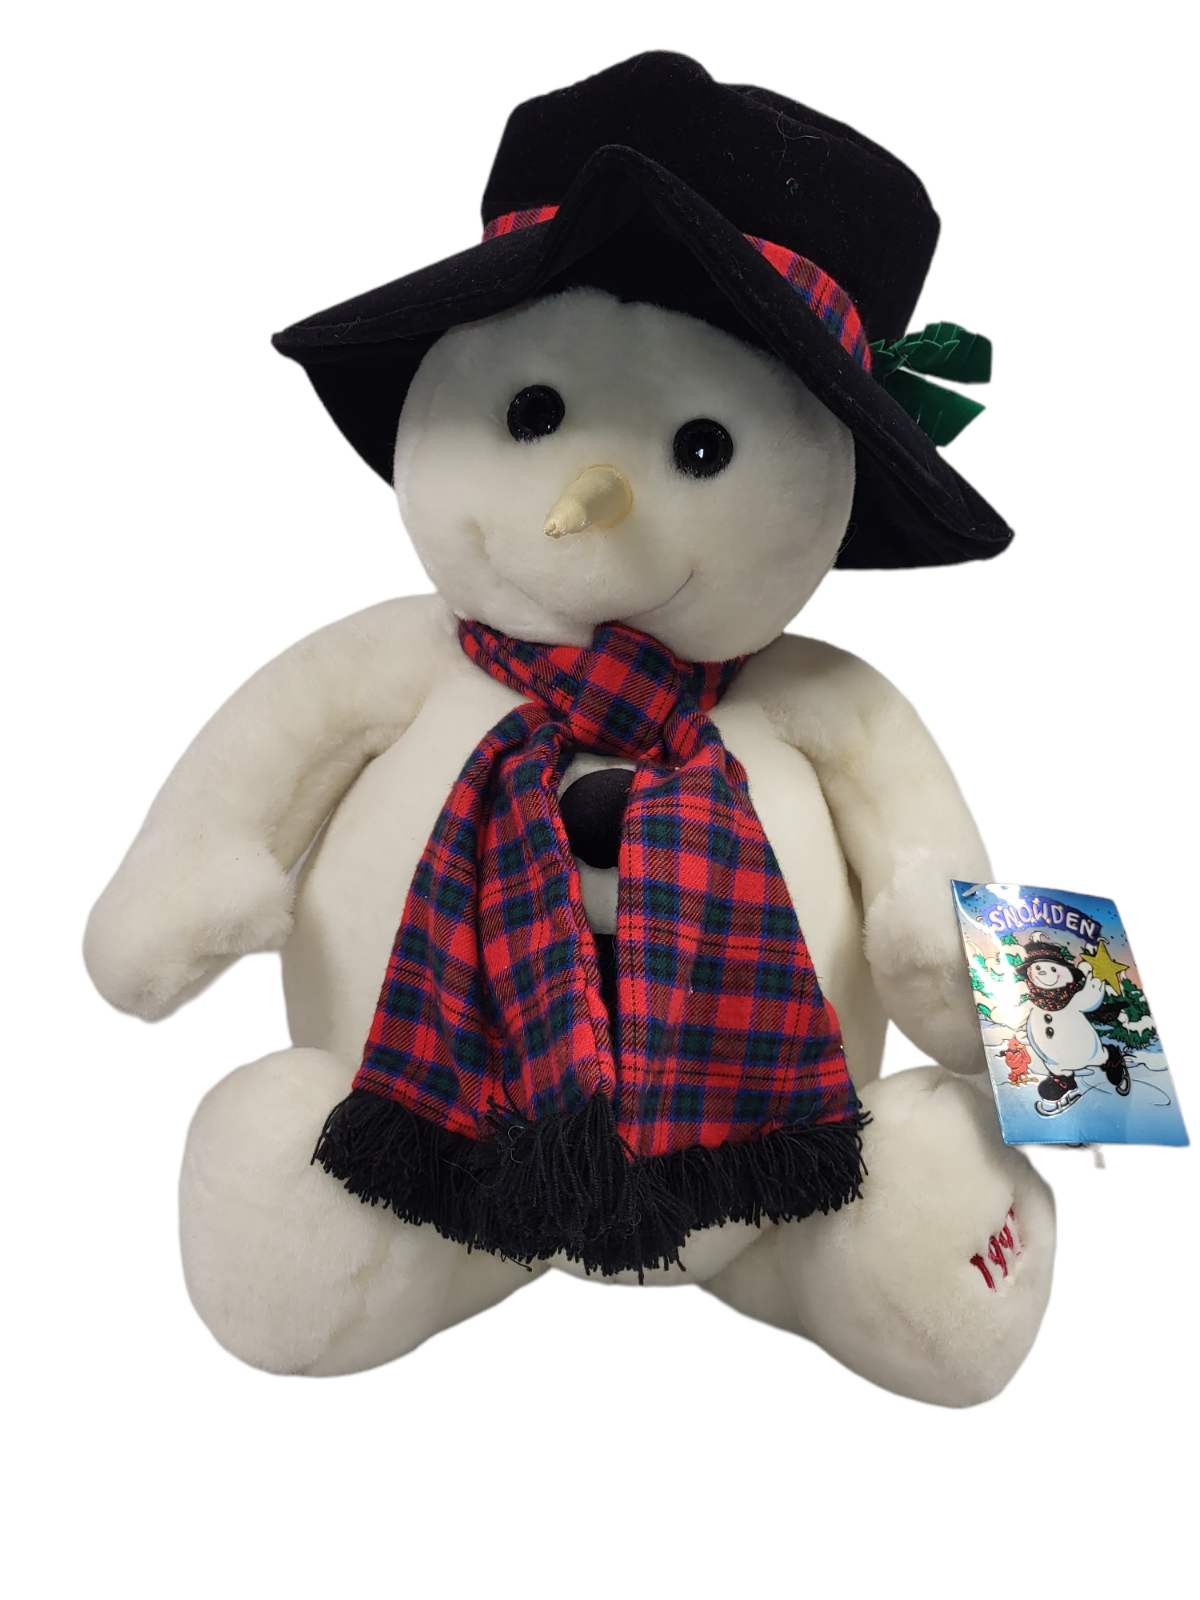 Primary image for Commonwealth Snowden Snowman plush 1997 Vintage Top Hat Christmas 20"